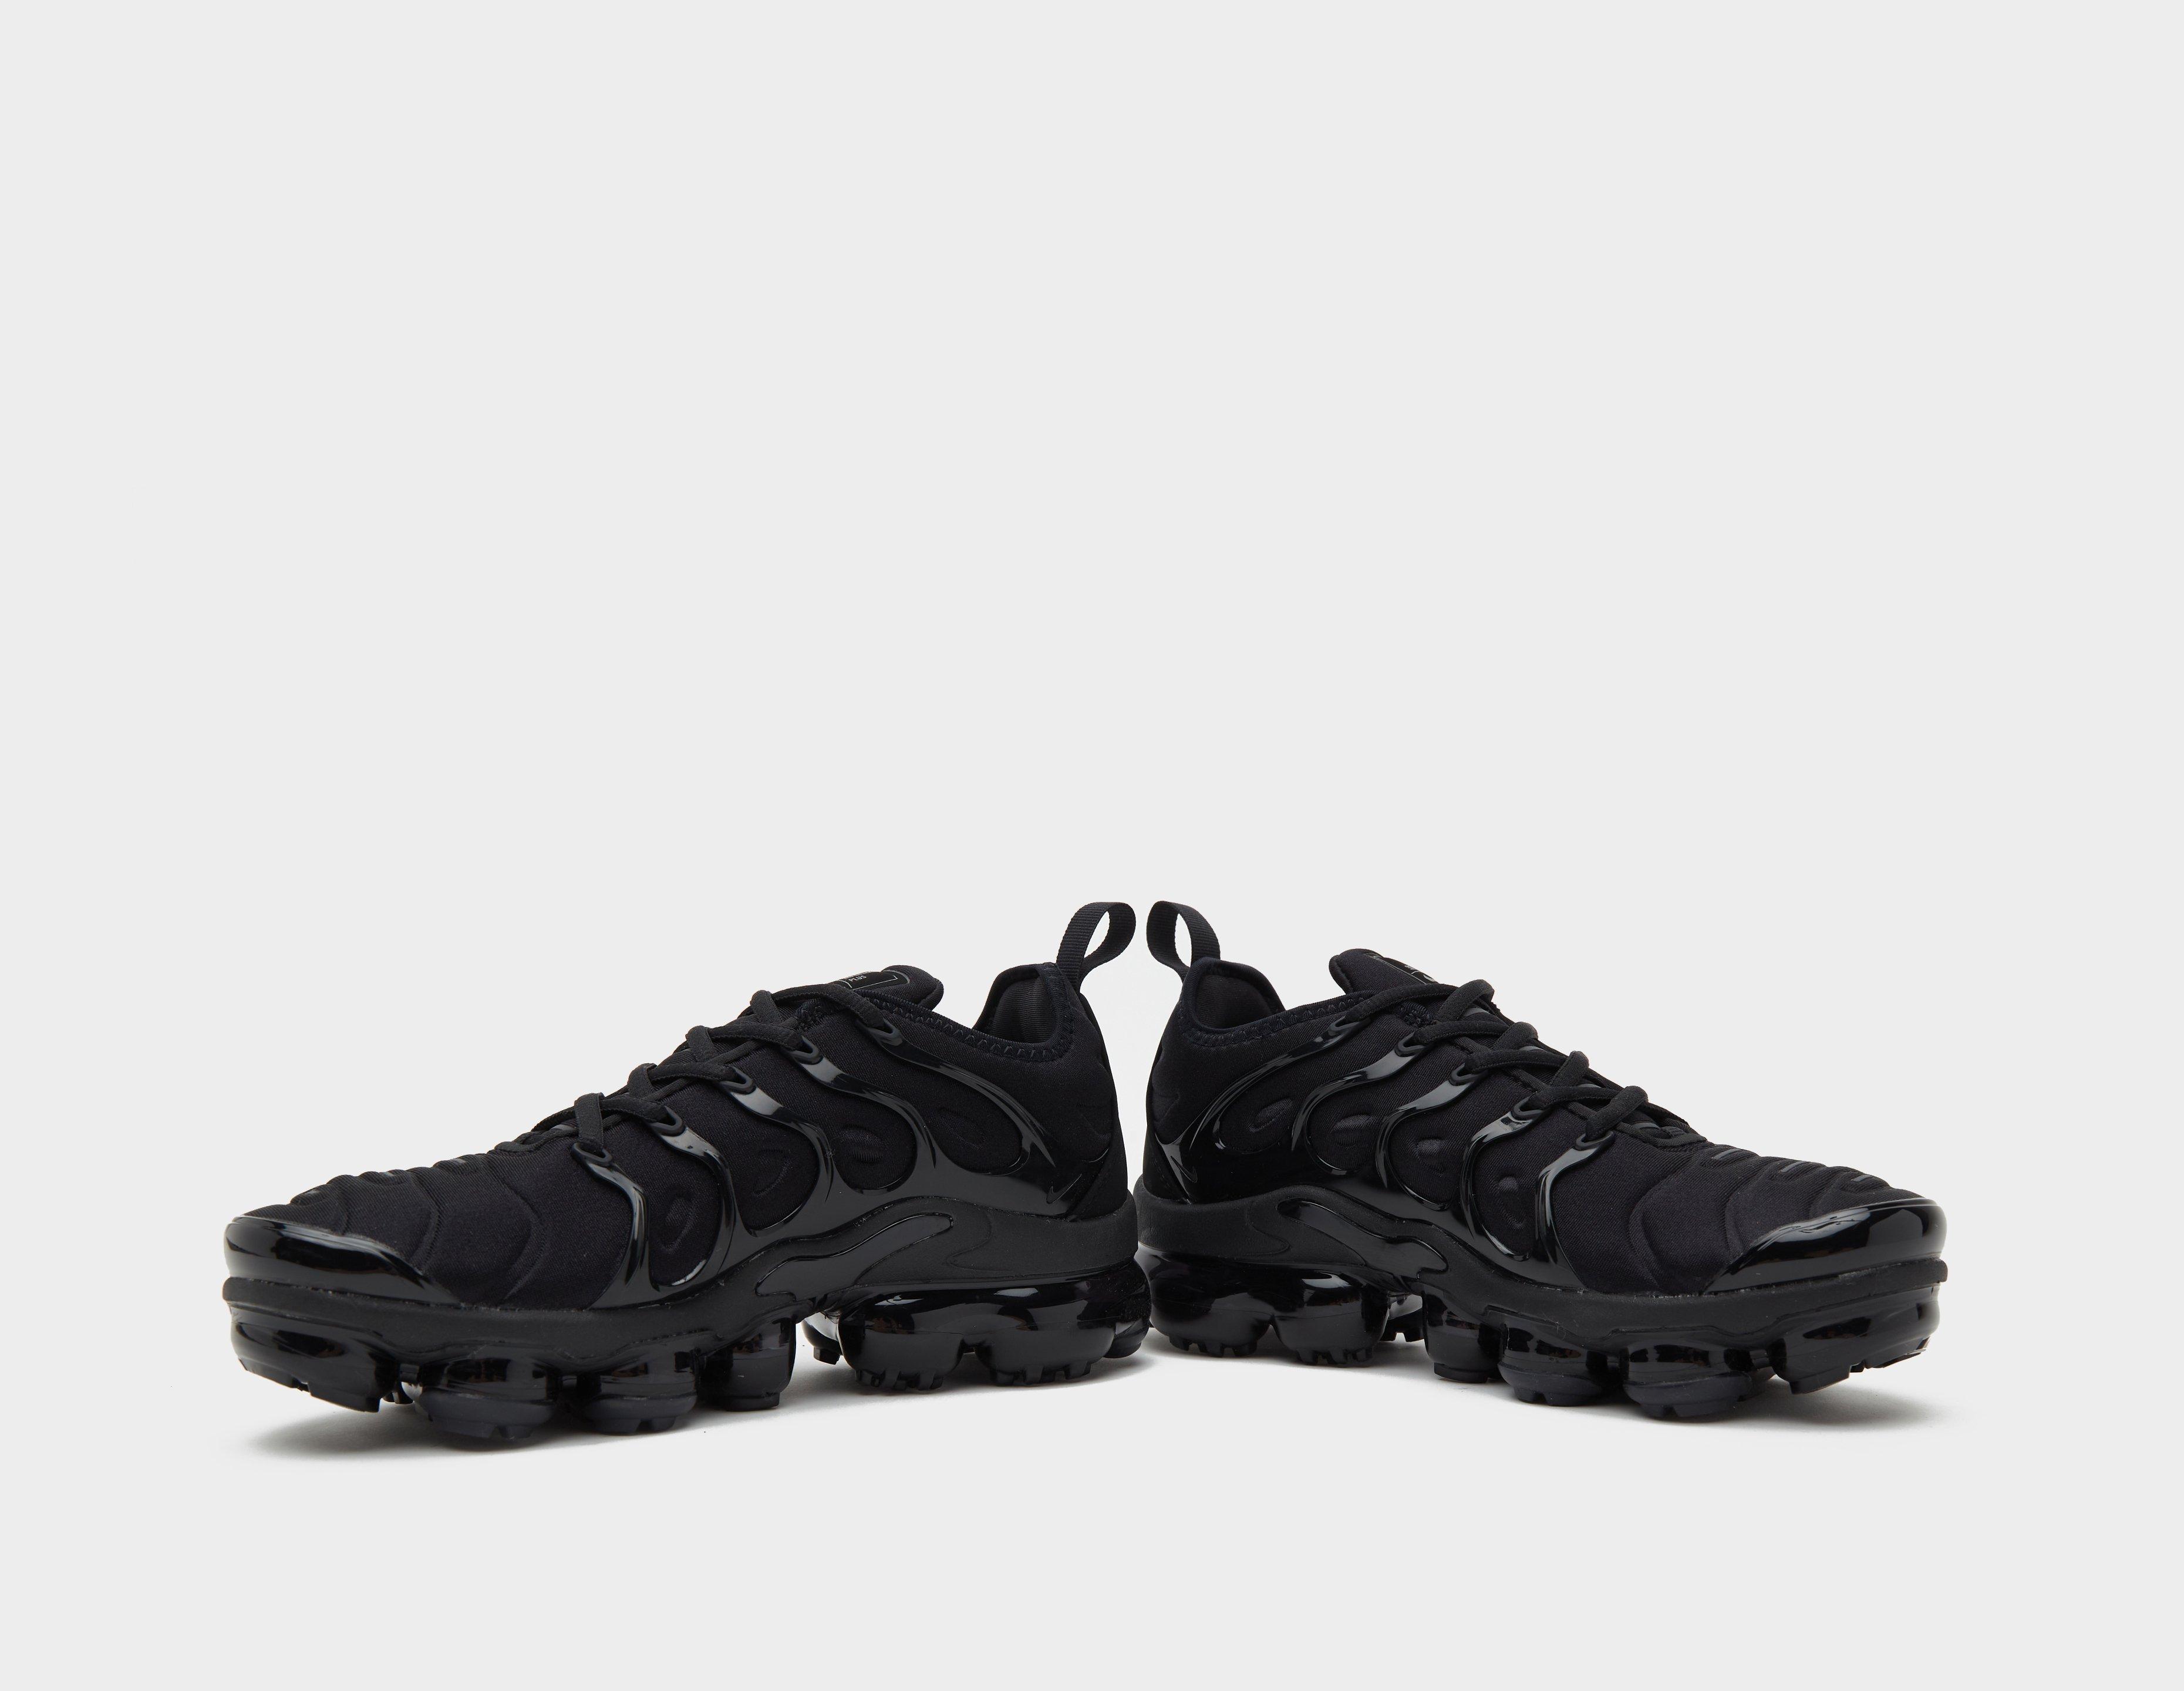 black and red vapormax plus women's